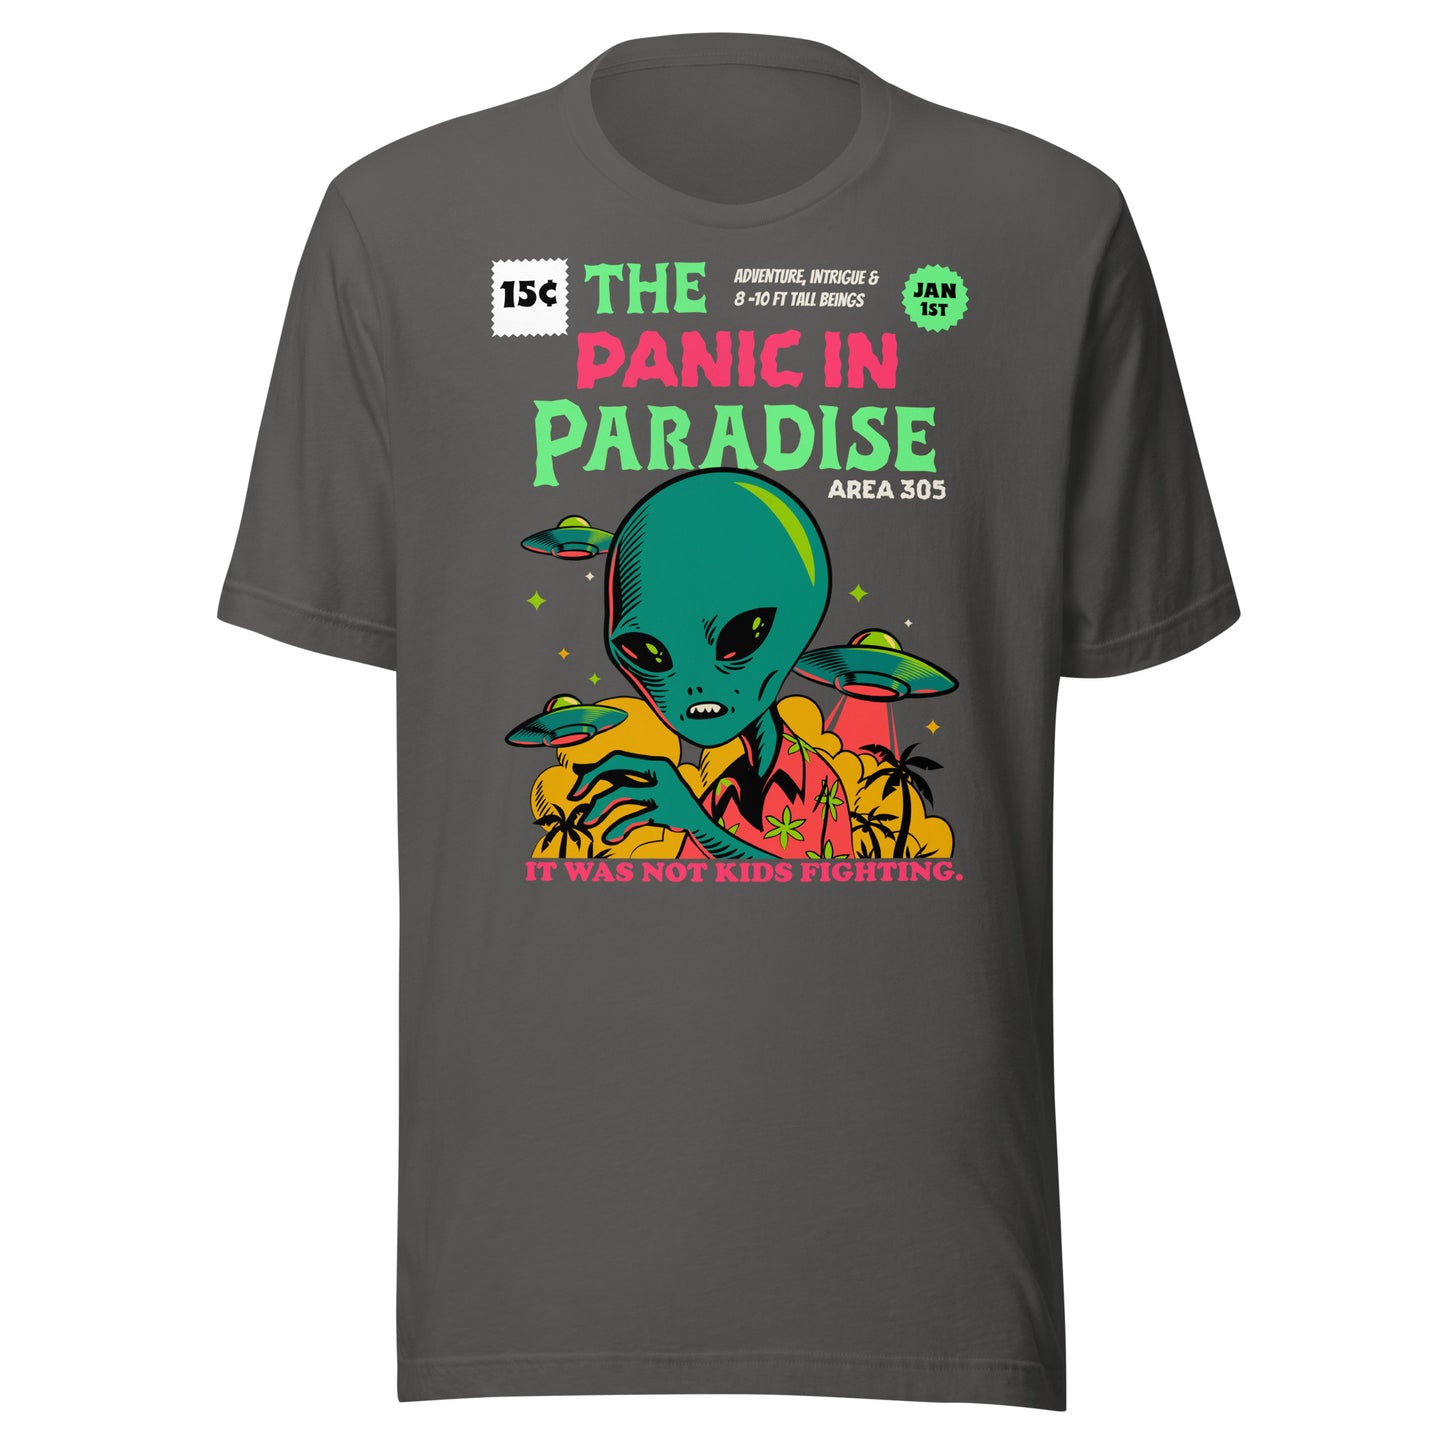 The Panic in Paradise